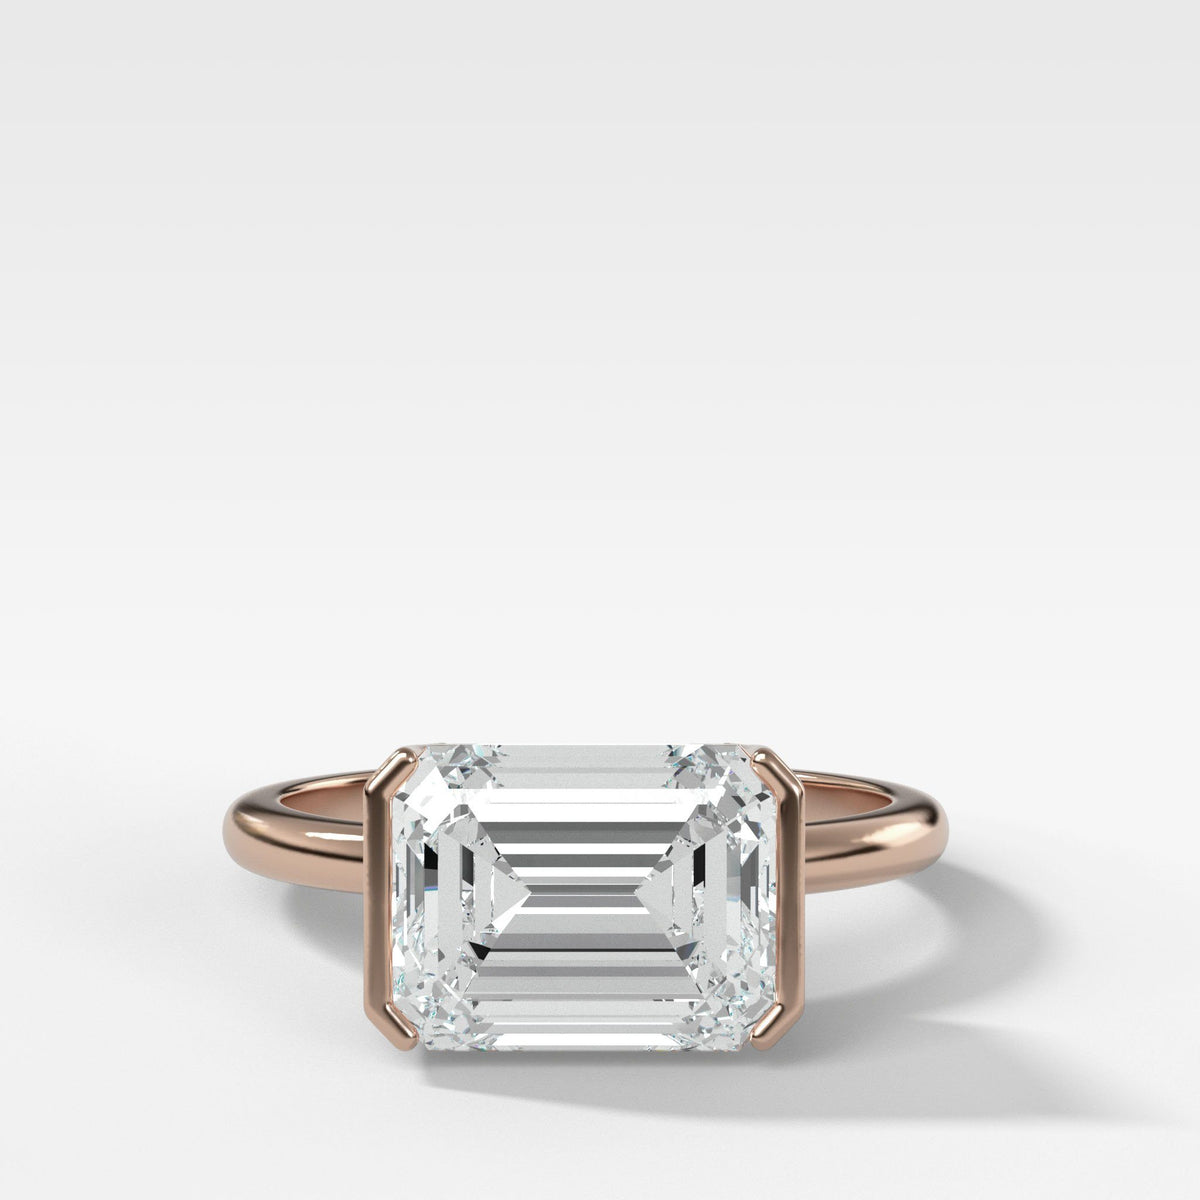 East West Half Bezel Solitaire Engagement Ring With Emerald Cut by Good Stone in Rose Gold